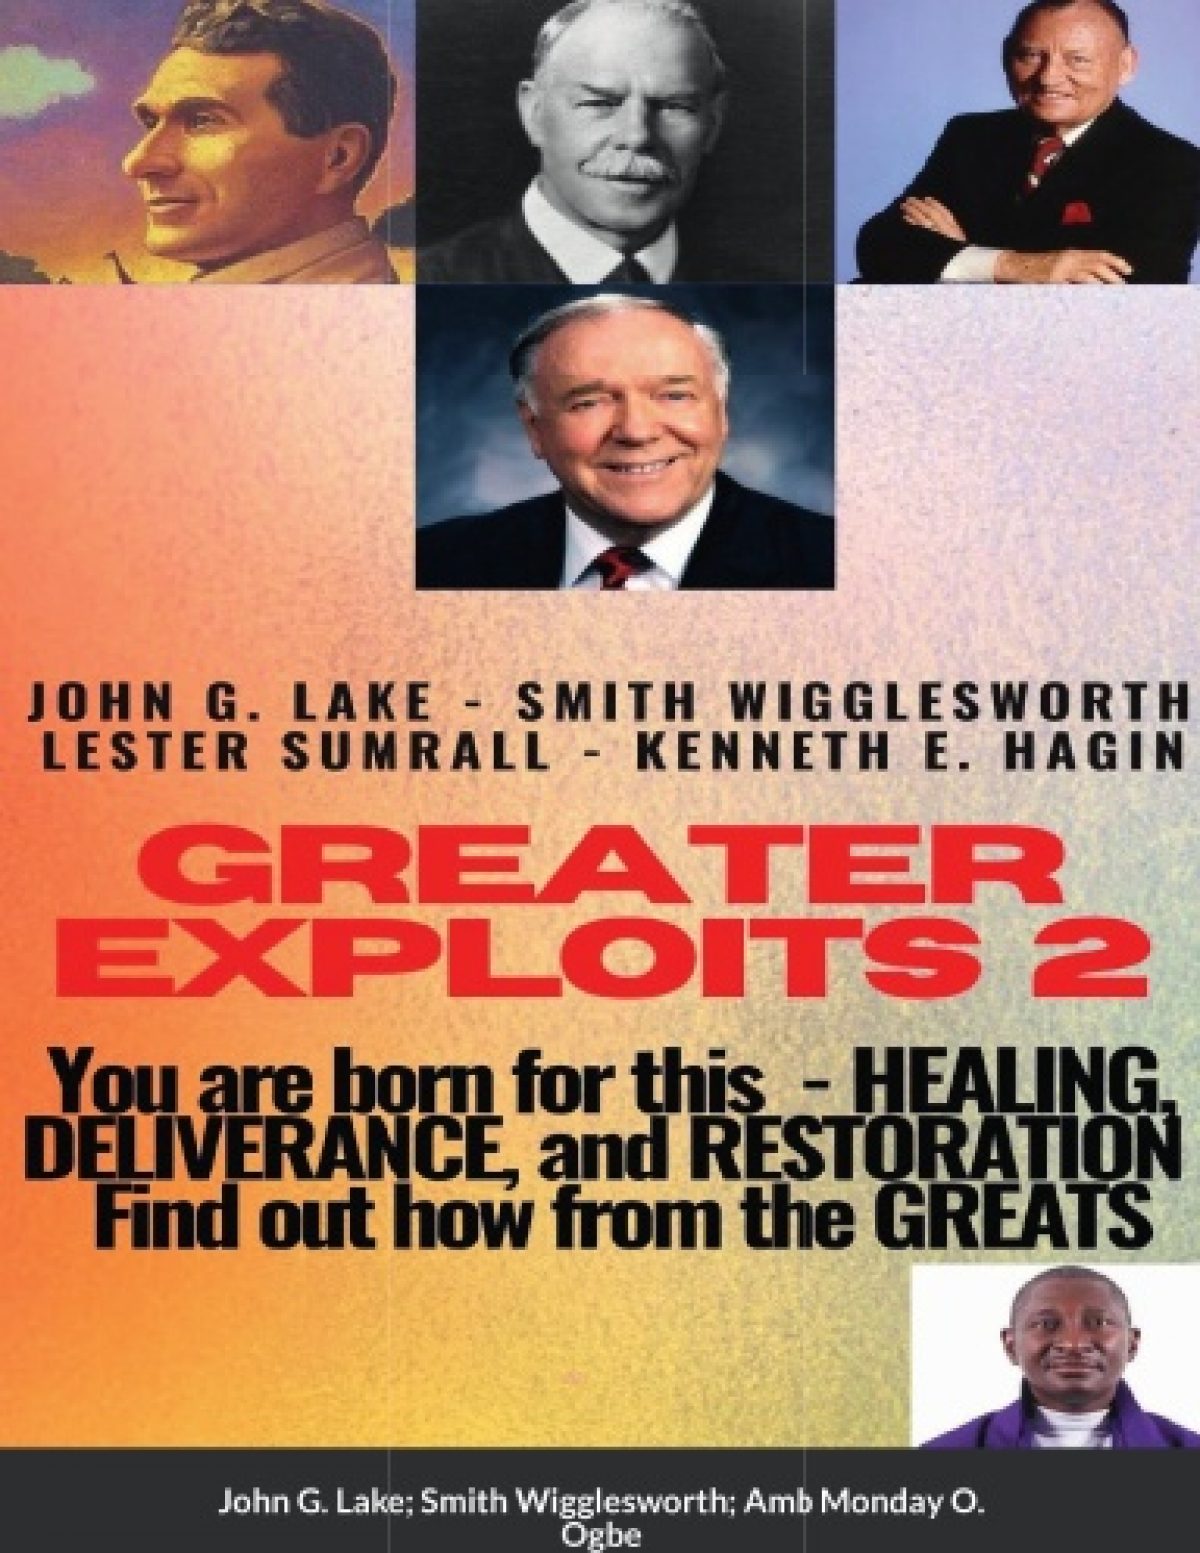 Greater Exploits 2 Paperback Edition – John G. Lake – Smith Wigglesworth – Lester Symrall – Kenneth E. Hagin – Healing, Deliverance and Restoration – You are Born for This ID: 15